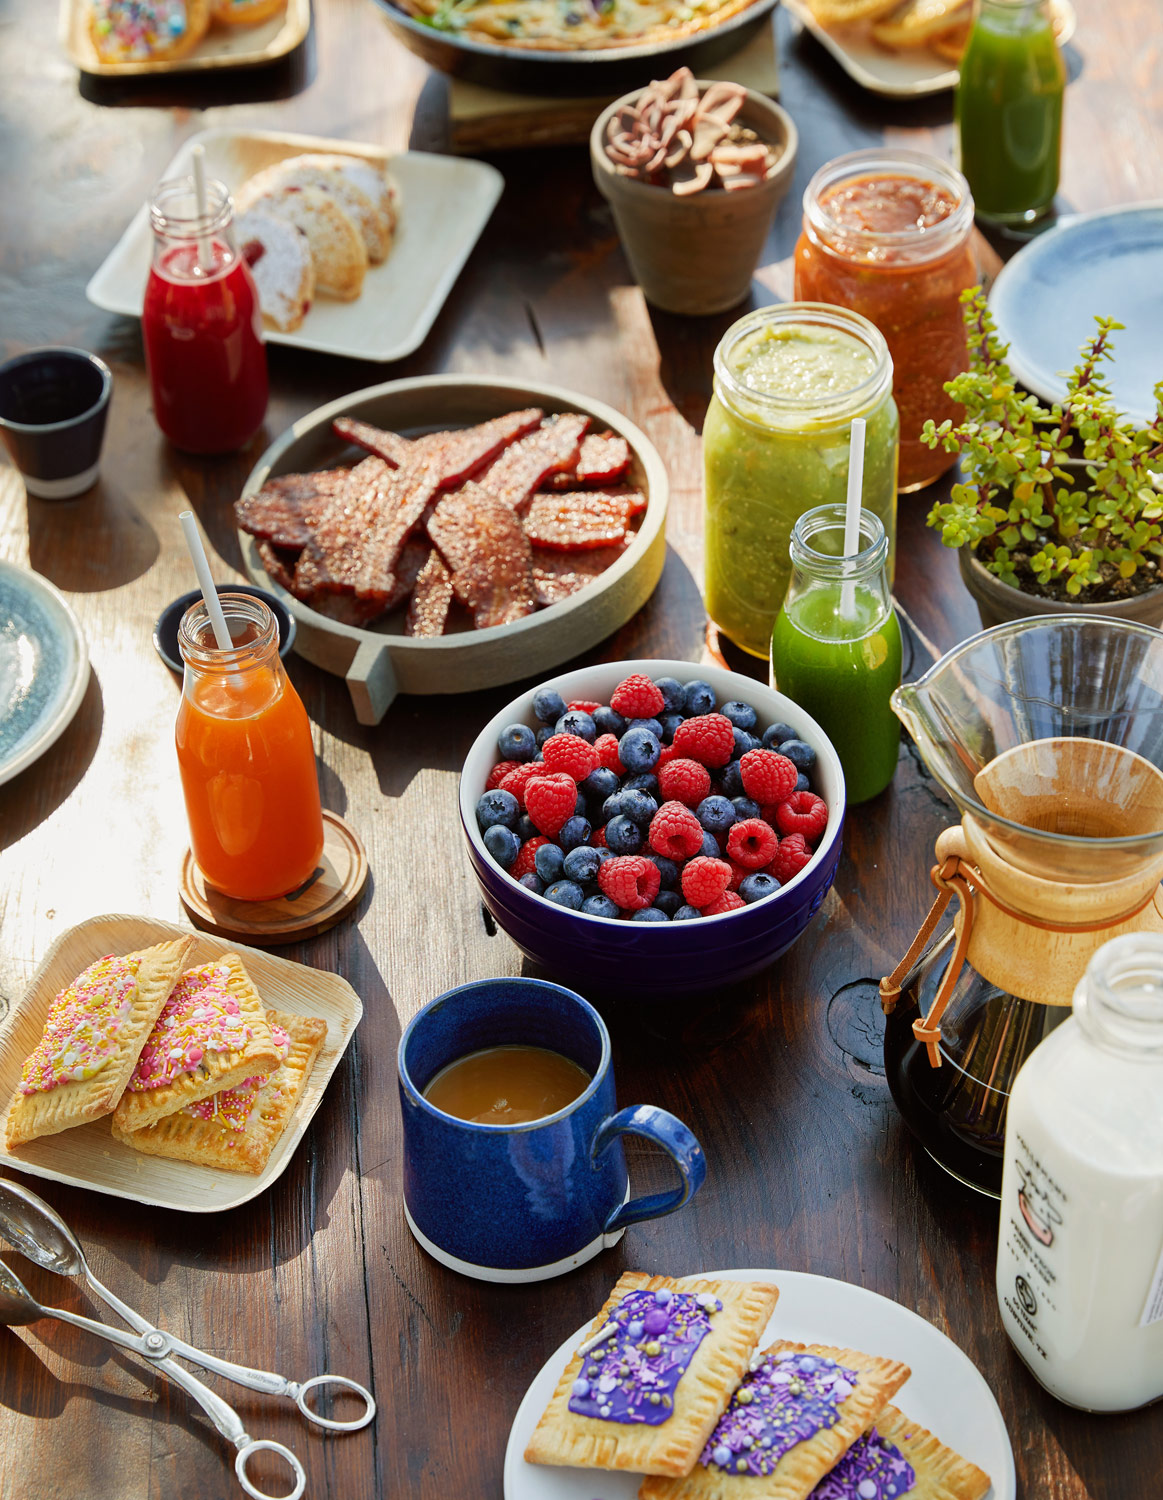 Breakfast spread on table in sunlight by lifestyle photographer Buff Strickland